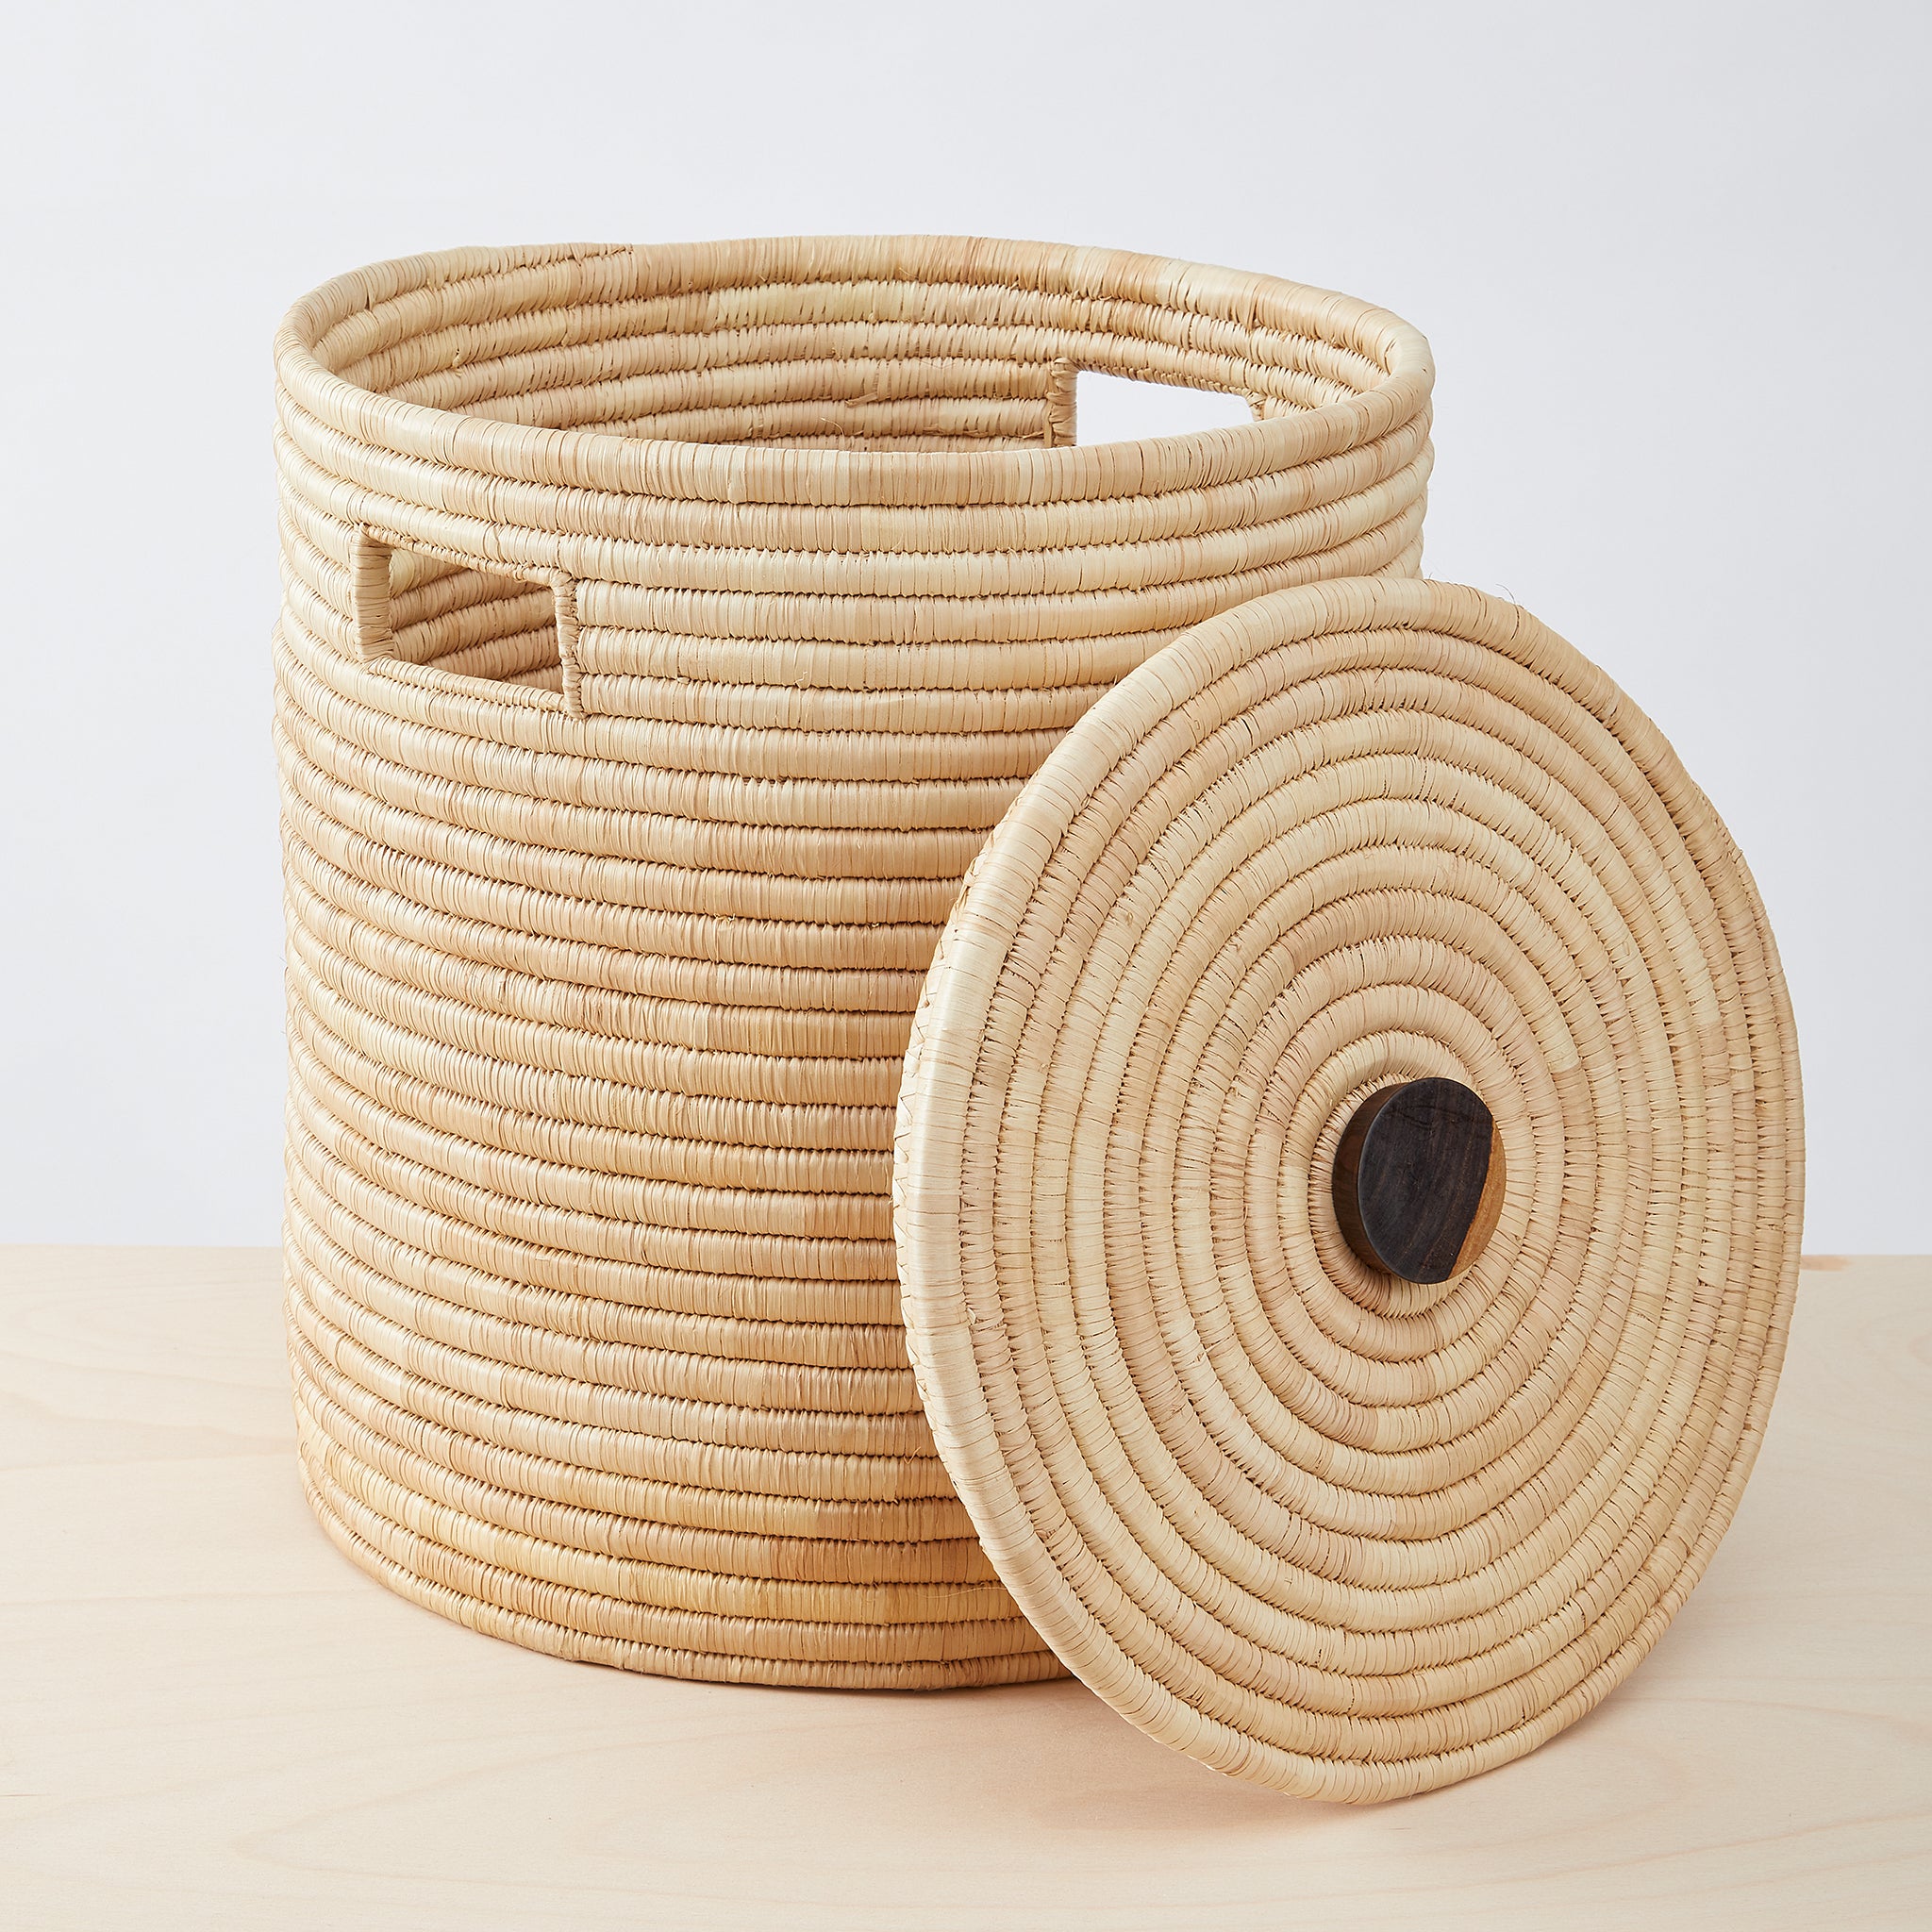 Laundry basket with lid and mahogany handle. Carefully and sustainably woven by hand in Malawi.